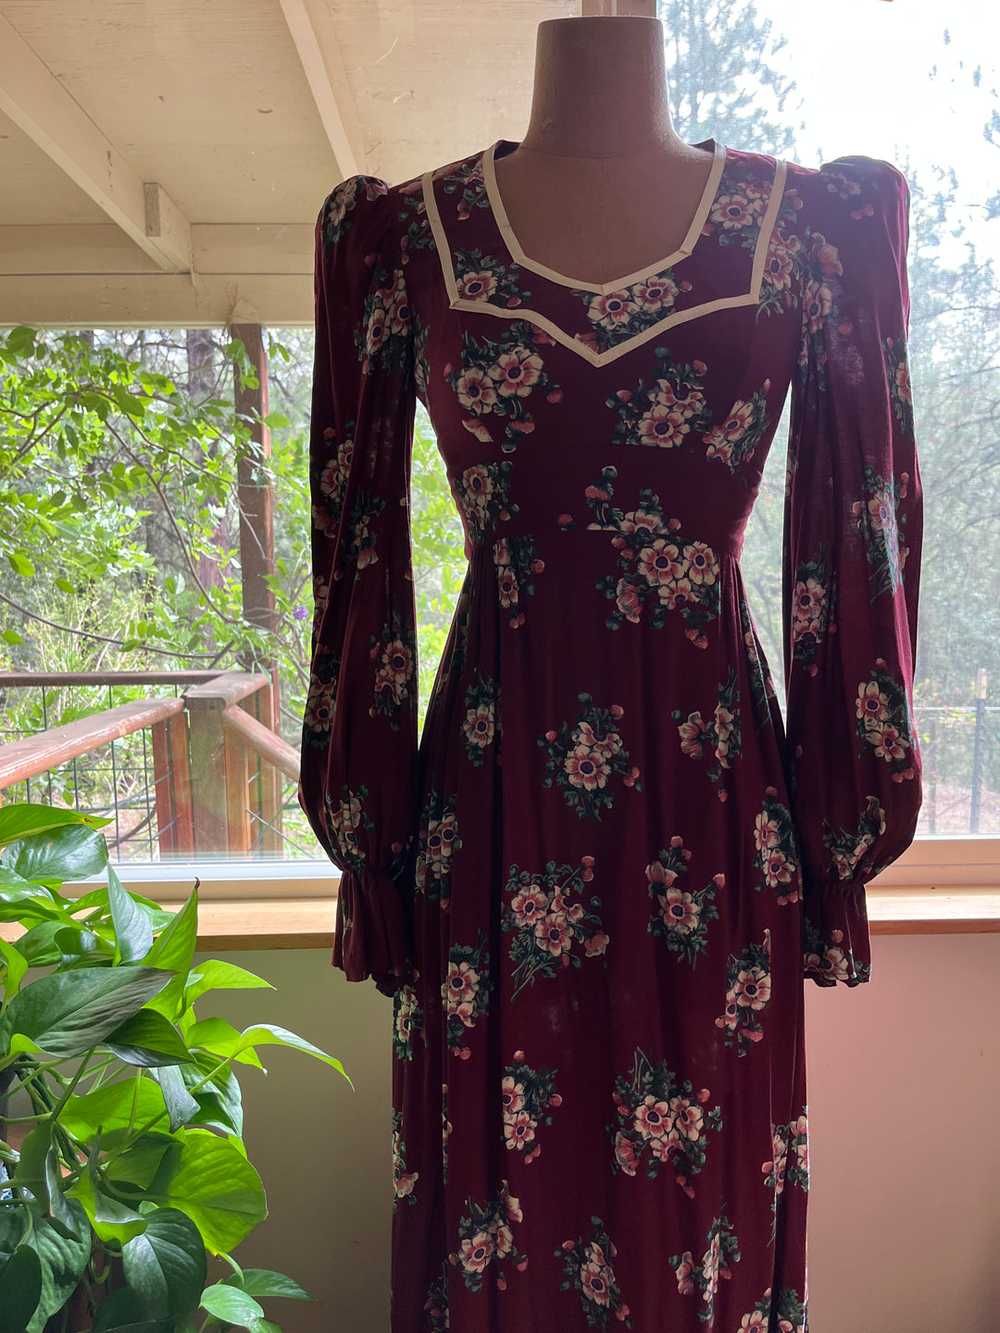 Authentic 1970's vintage burgundy rayon dress by … - image 3